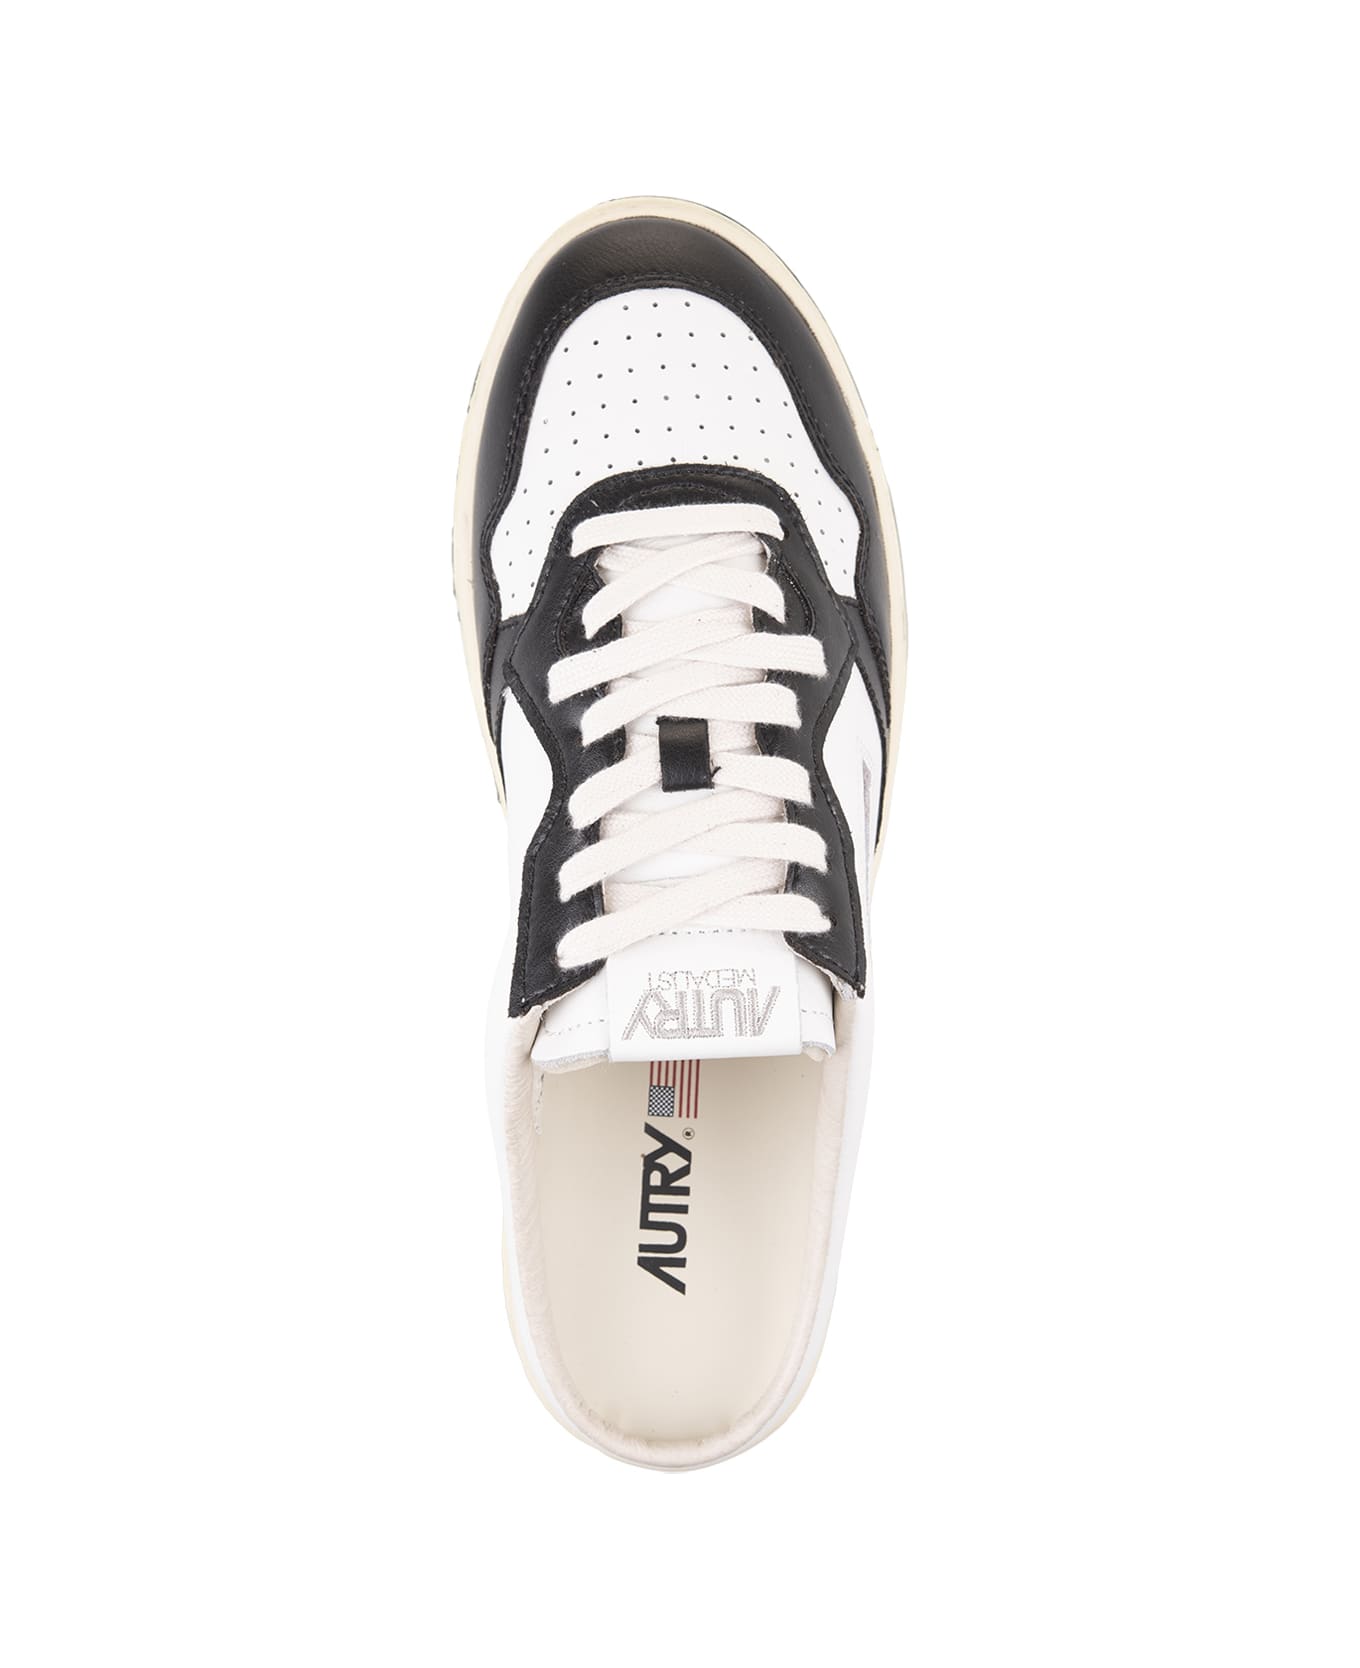 Autry White And Black Medalist Mule Sneakers - Black スニーカー